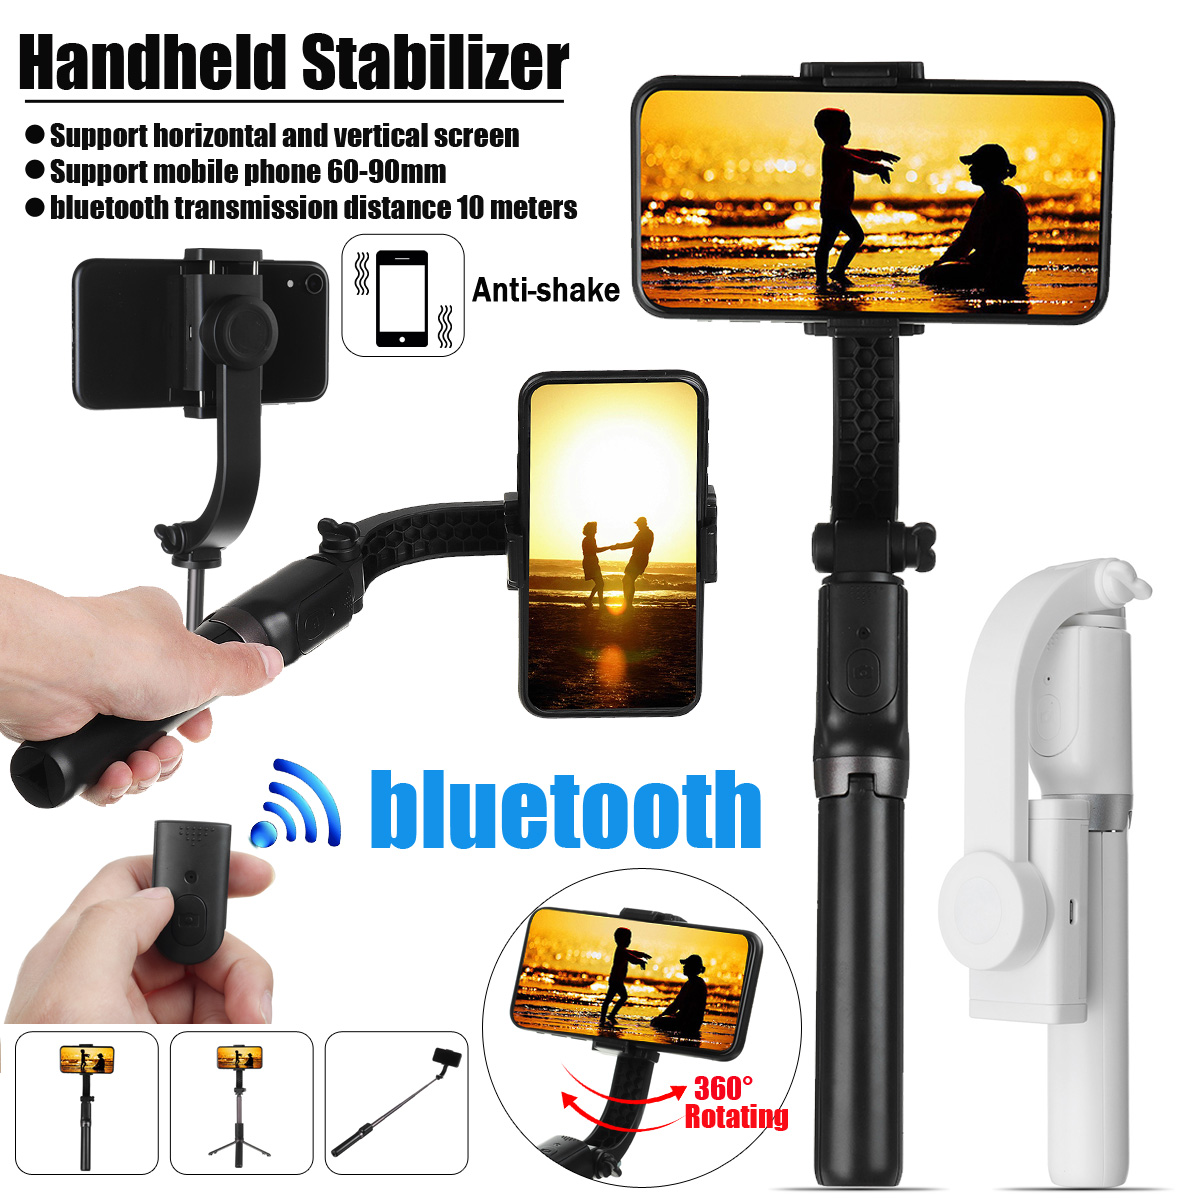 R15-Extended-Telescopic-bluetooth-Wireless-Handheld-Stabilizer-Mobile-Phone-Holder-Stand-for-Outdoor-1822120-2